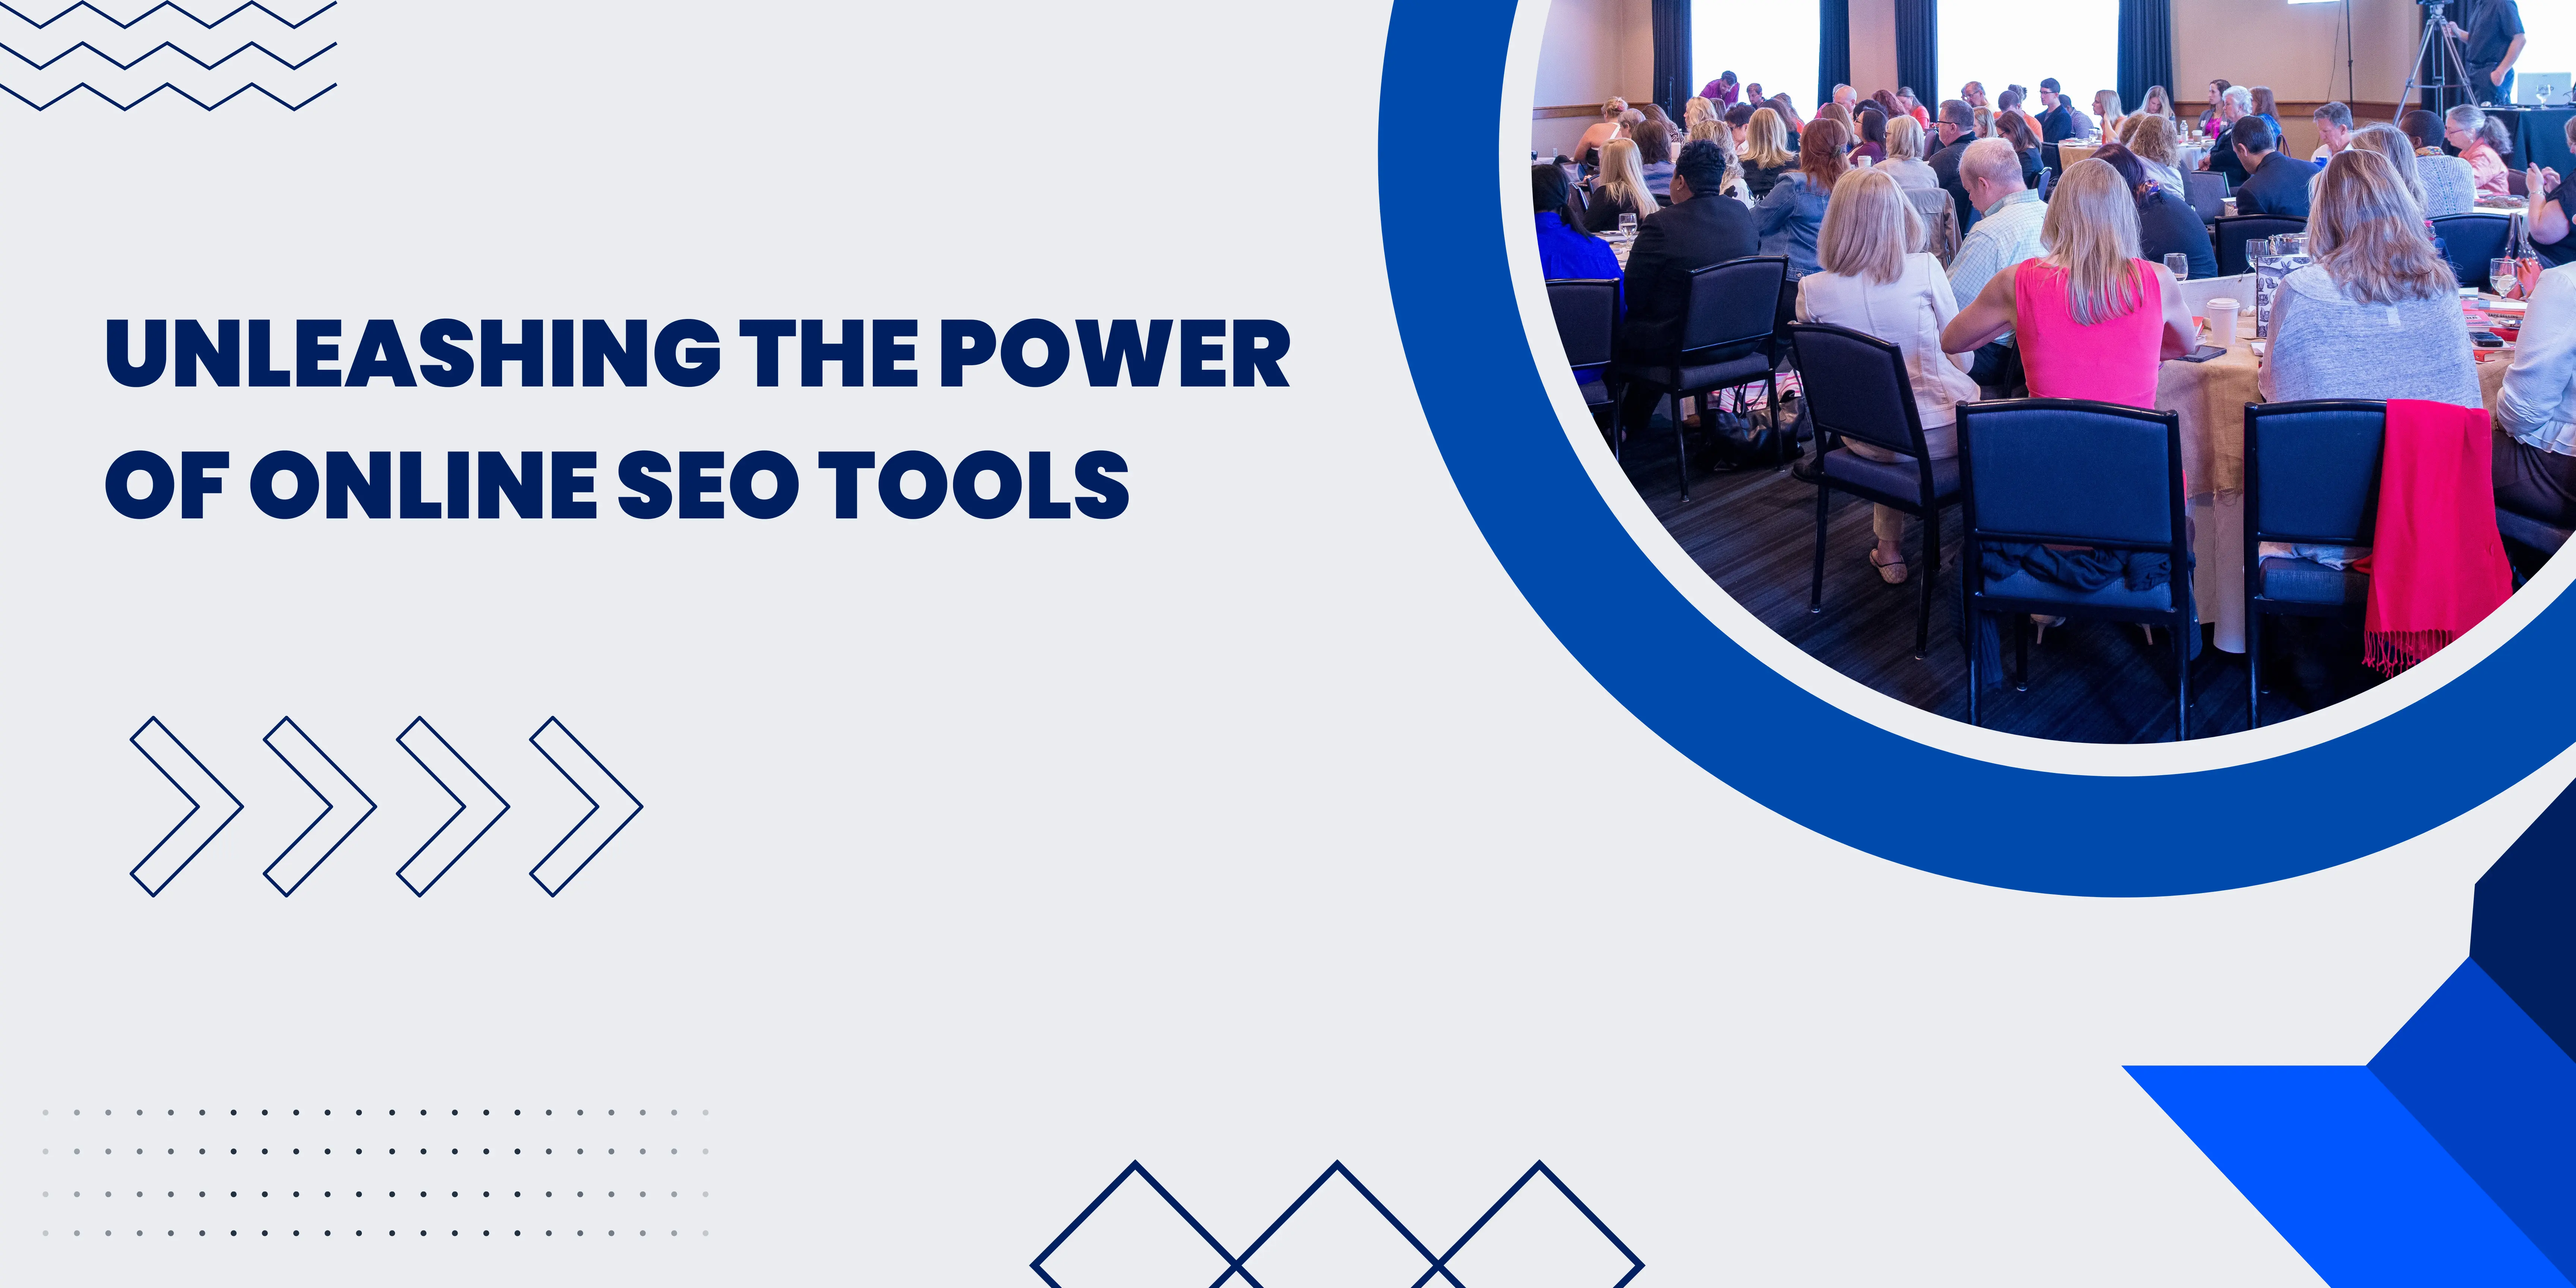 Unleashing the Power of Online SEO Tools: A Comprehensive Guide to Free SEO Checkers and Website Analysis